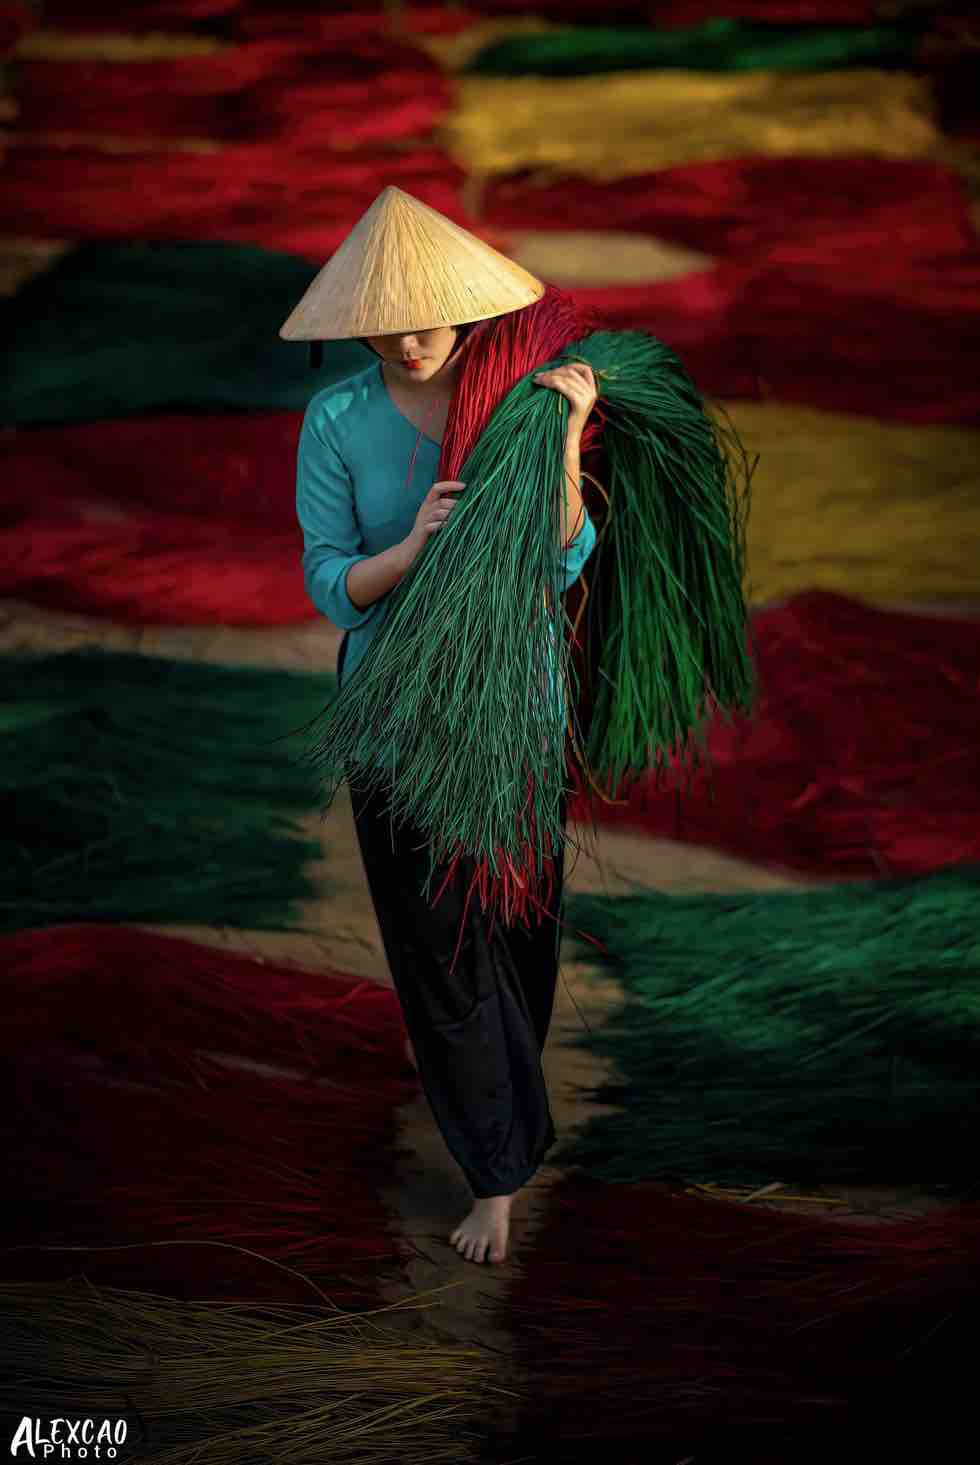 Alex Cao’s photo 'Nghe lam chieu' (Straw Mat Making) captures a moment of an artisan carrying colored sedges, the material used to make straw mats, on her shoulder. Photo: Alex Cao